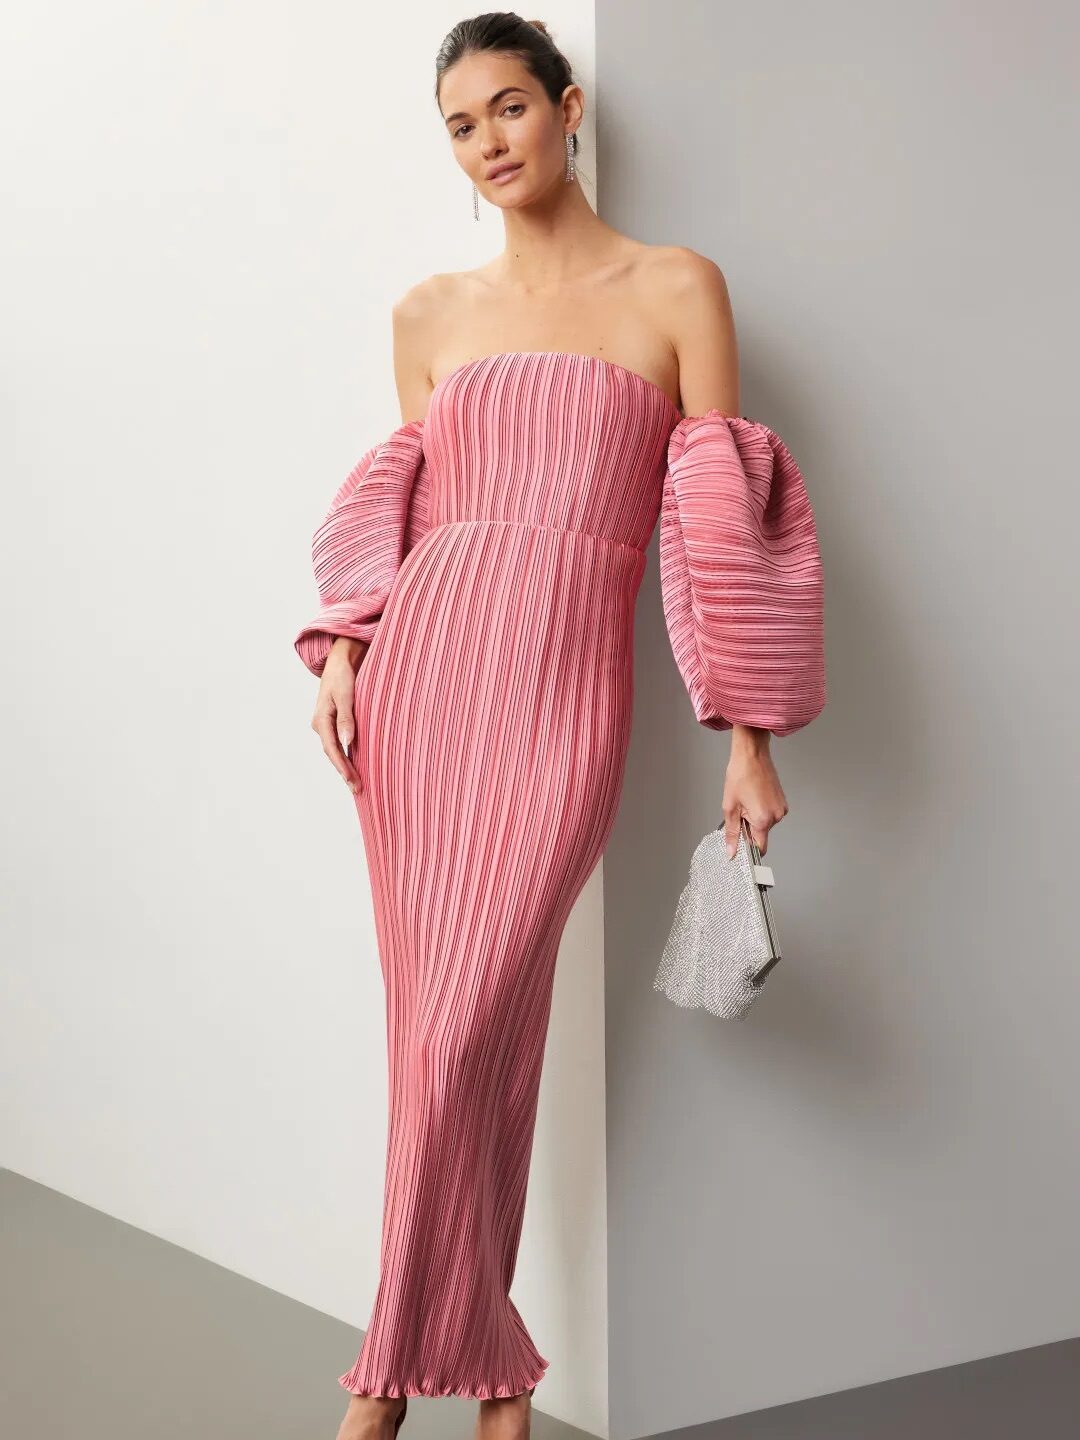 A woman in an elegant pink striped off-the-shoulder gown with puff sleeves, holding a silver clutch, against a light gray backdrop.